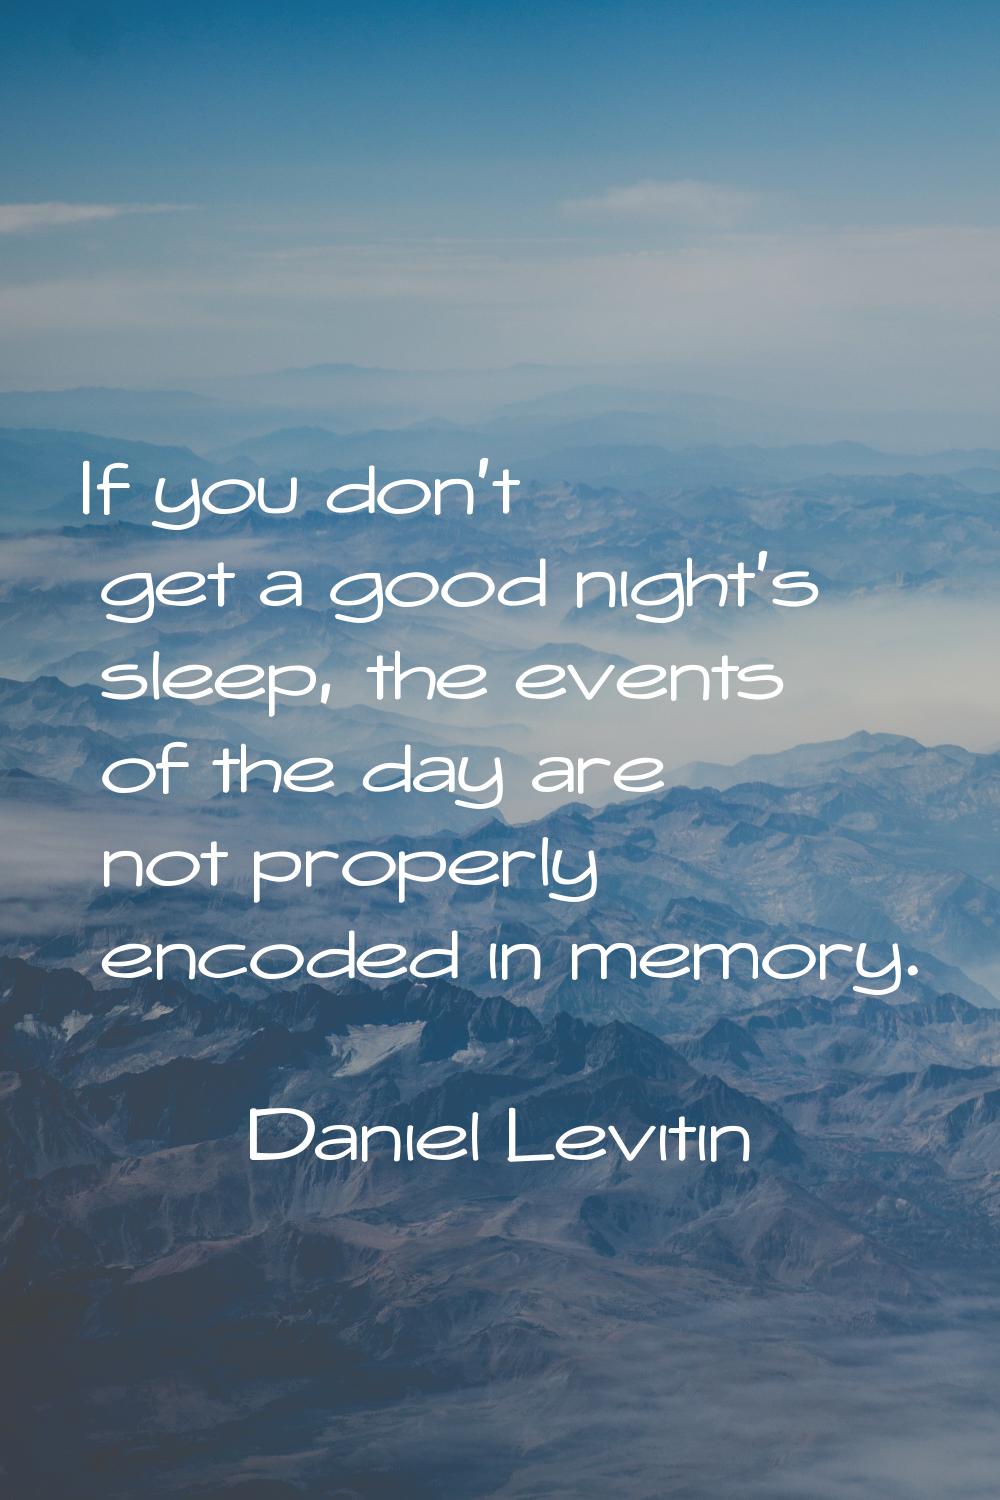 If you don't get a good night's sleep, the events of the day are not properly encoded in memory.